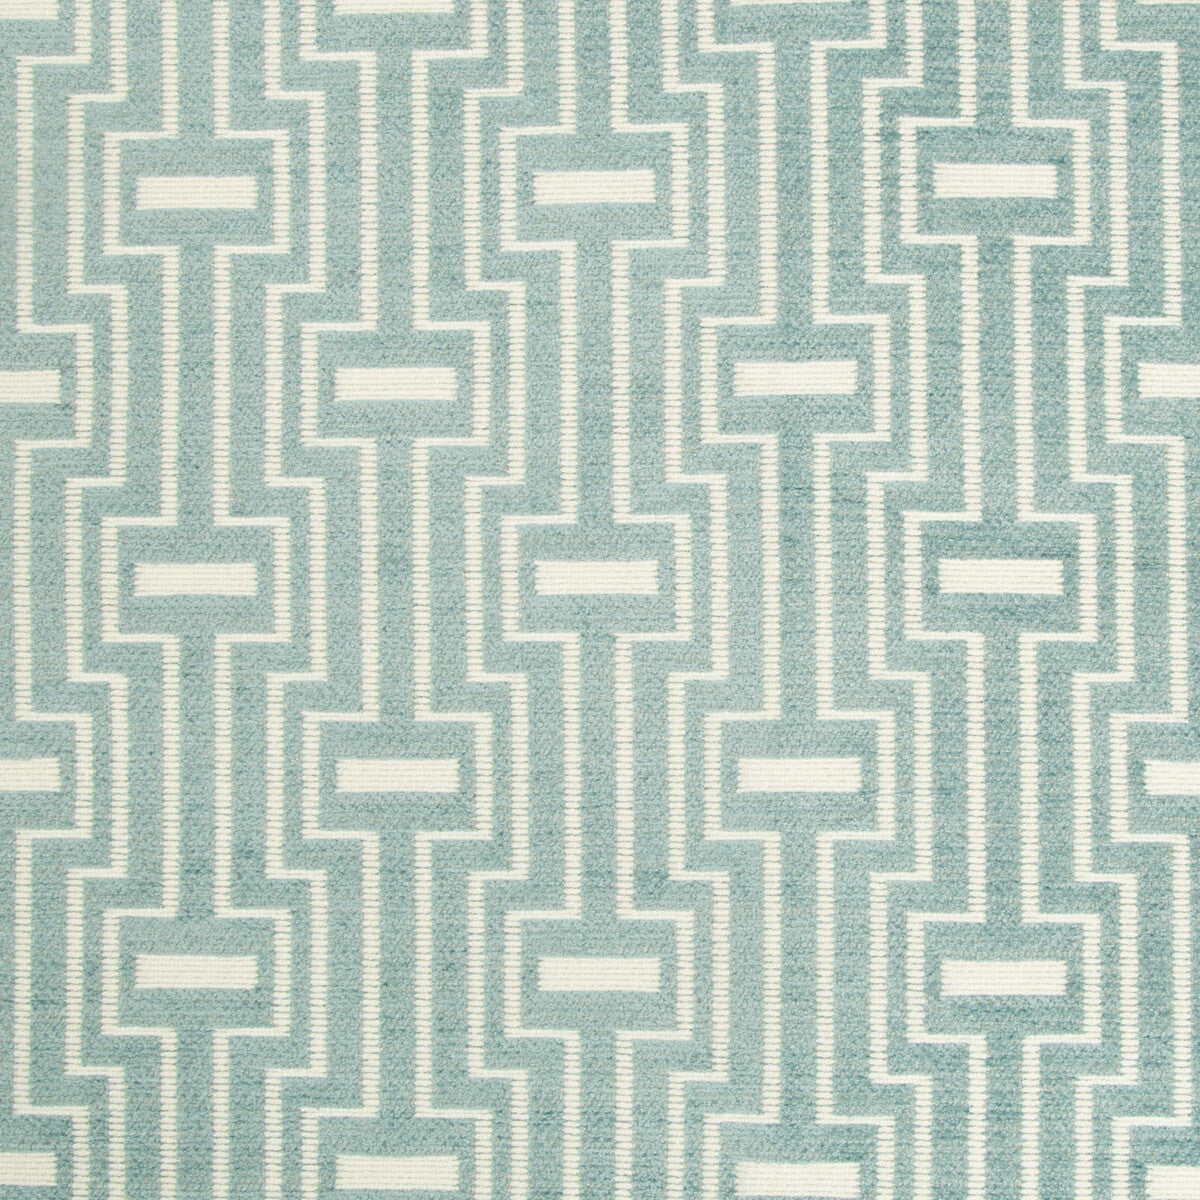 Kravet Contract fabric in 34753-15 color - pattern 34753.15.0 - by Kravet Contract in the Gis collection